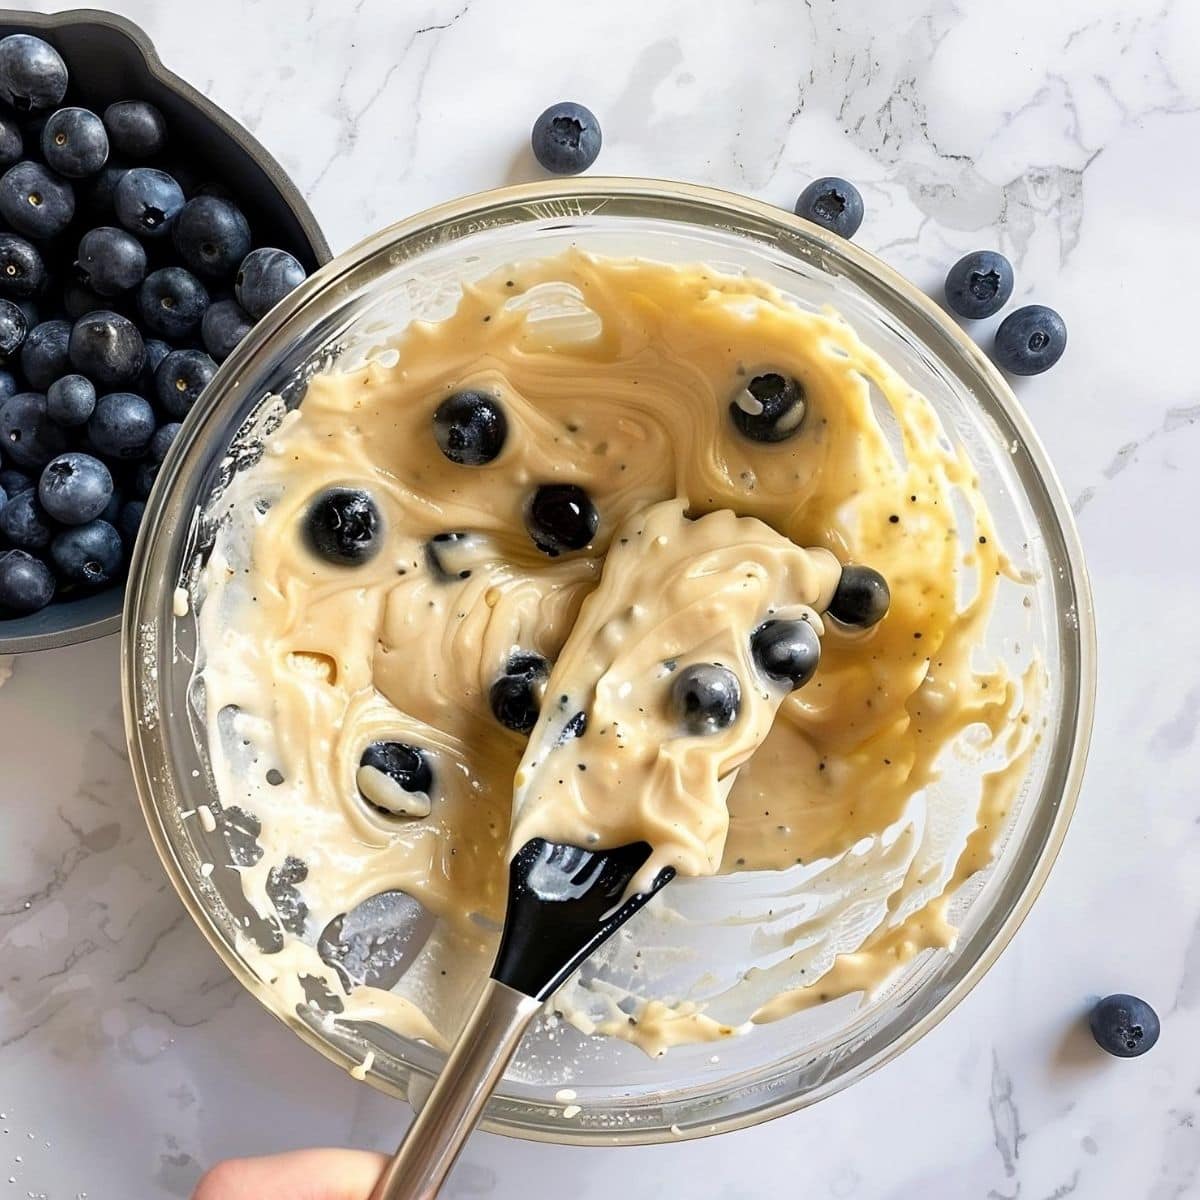 Top View of Lemon Blueberry Muffin Batter with Fresh Blueberries in a Glass Bowl on a White Marble Table with a Bowl of Blueberries to the Side